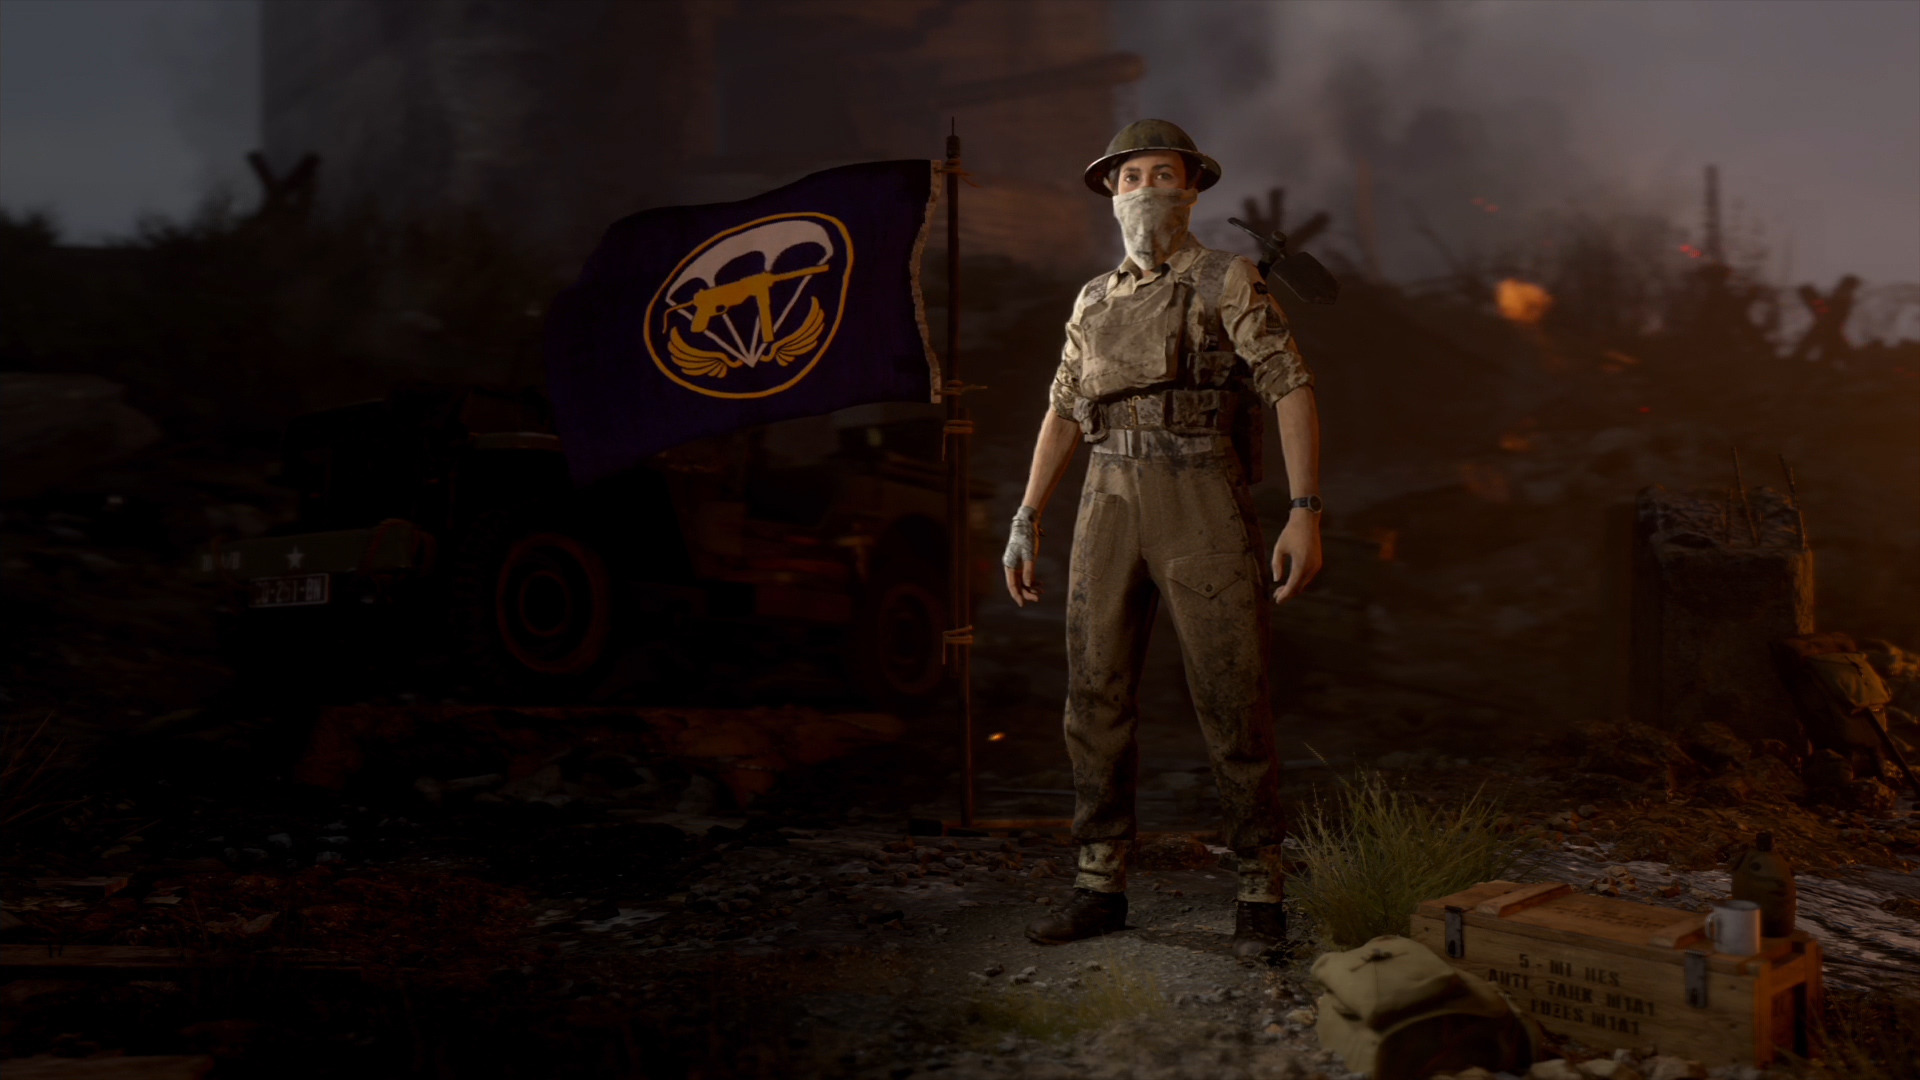 Call of Duty: WWII PS4 Review - EIP Gaming